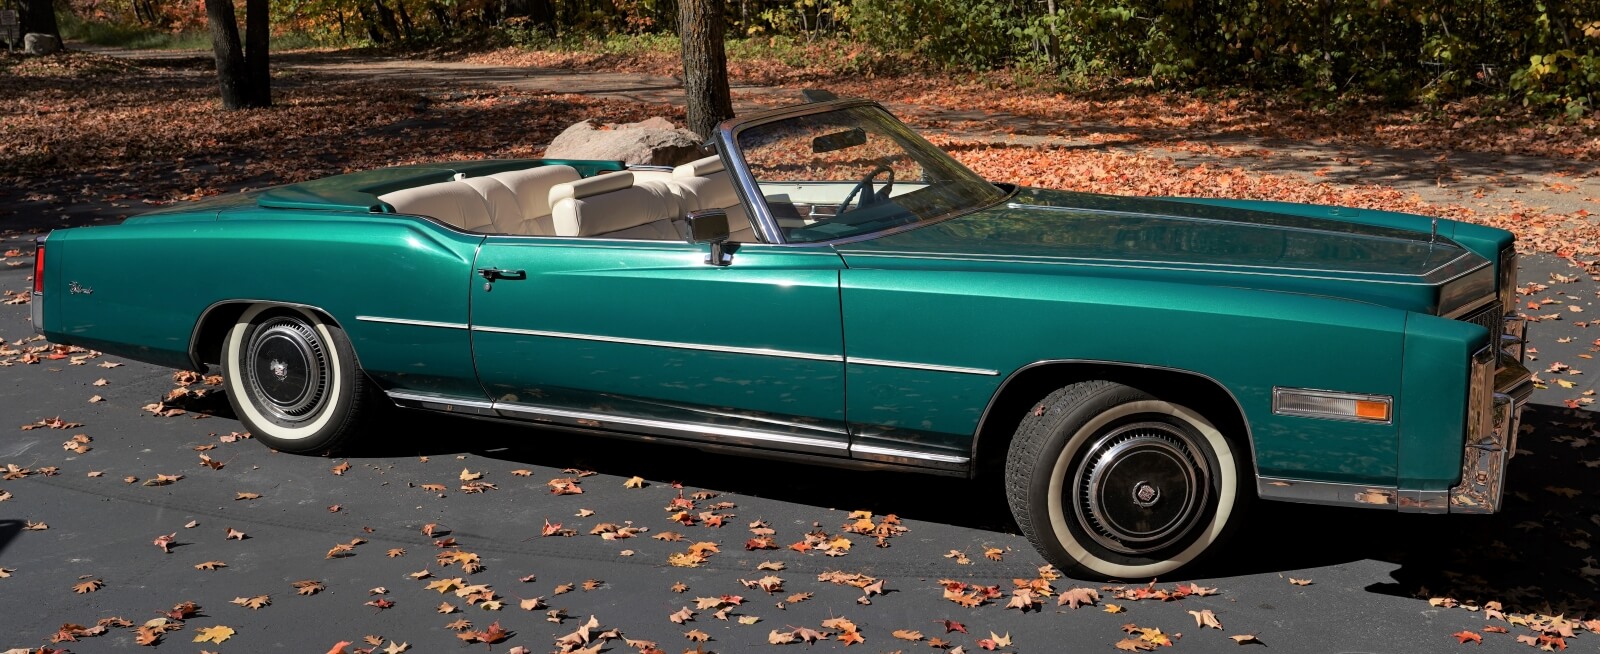 Faith and Neil Hensrud's 1976 Cadillac Eldorado, which was recently donated to the BSU Foundation